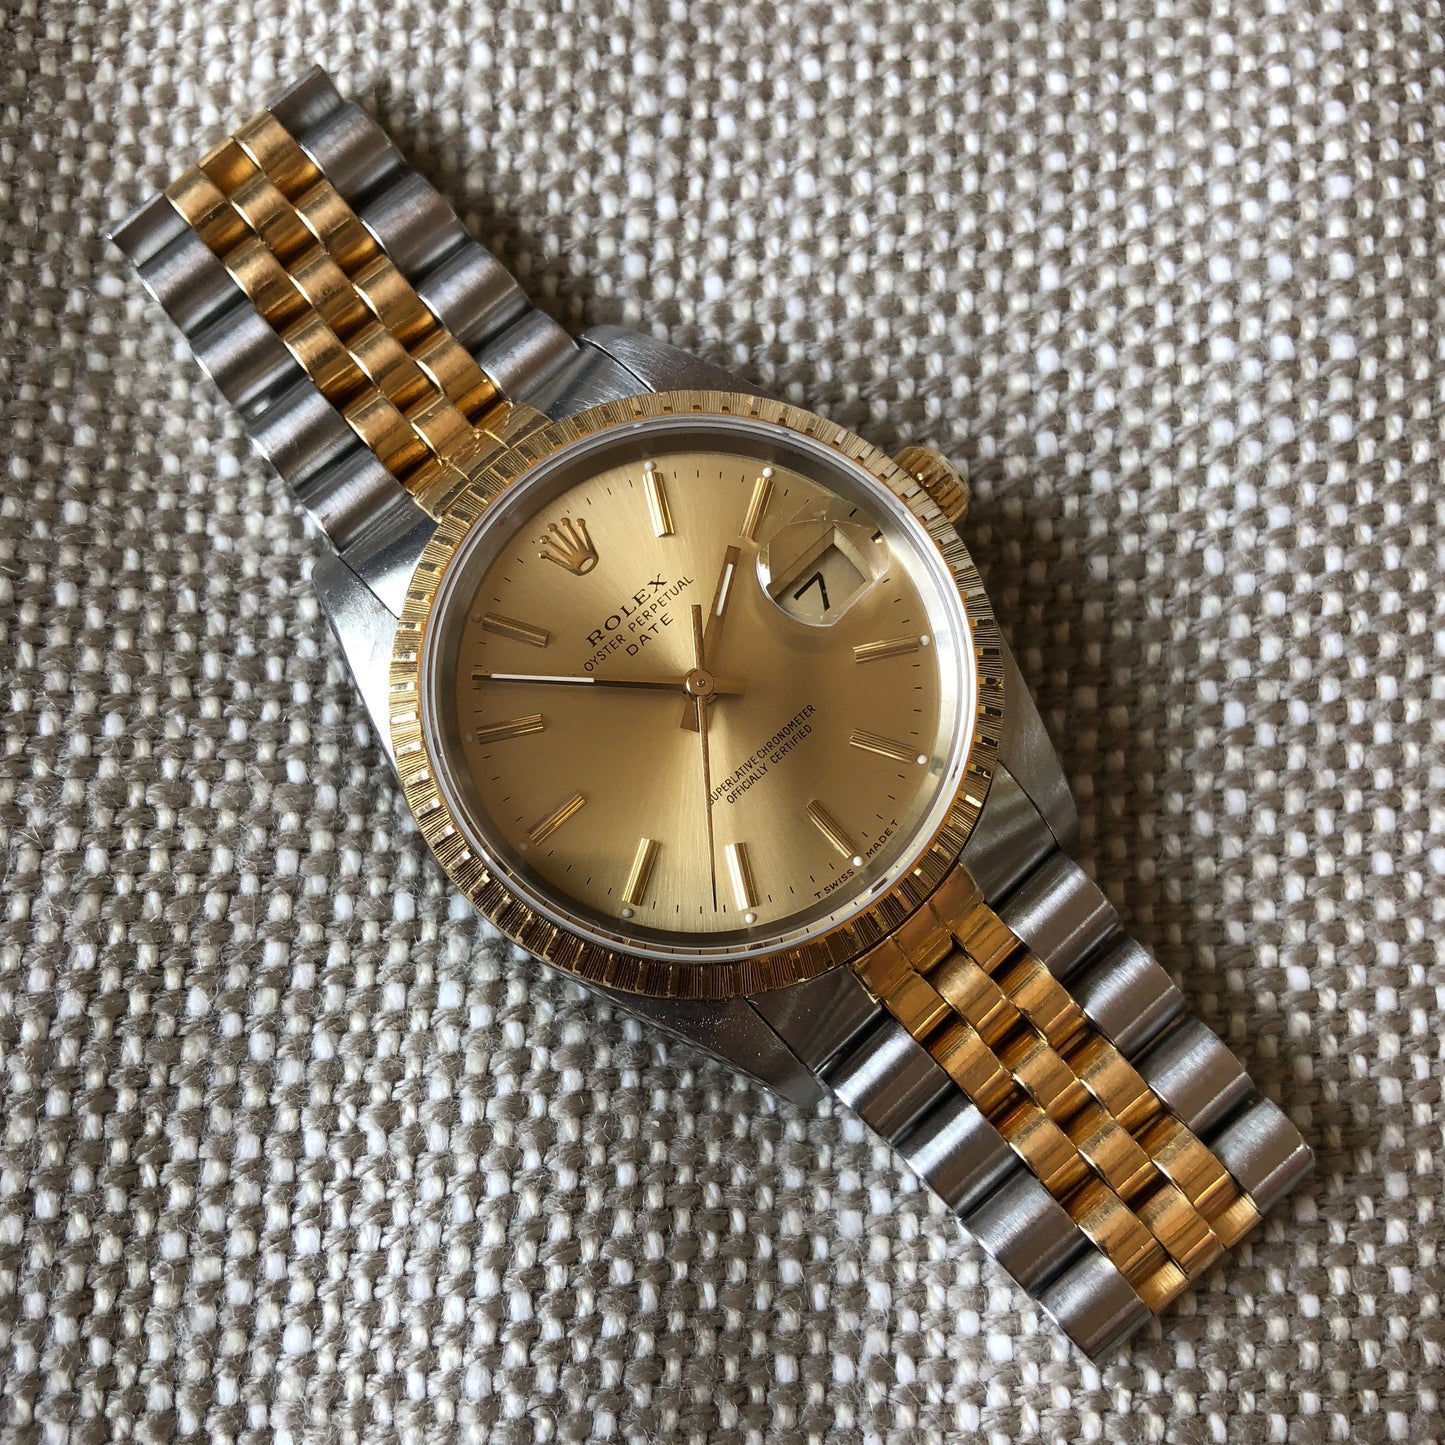 Rolex Date 15223 Oyster Perpetual Two Tone Steel Gold Jubilee Wristwatch Circa 1989 - Hashtag Watch Company